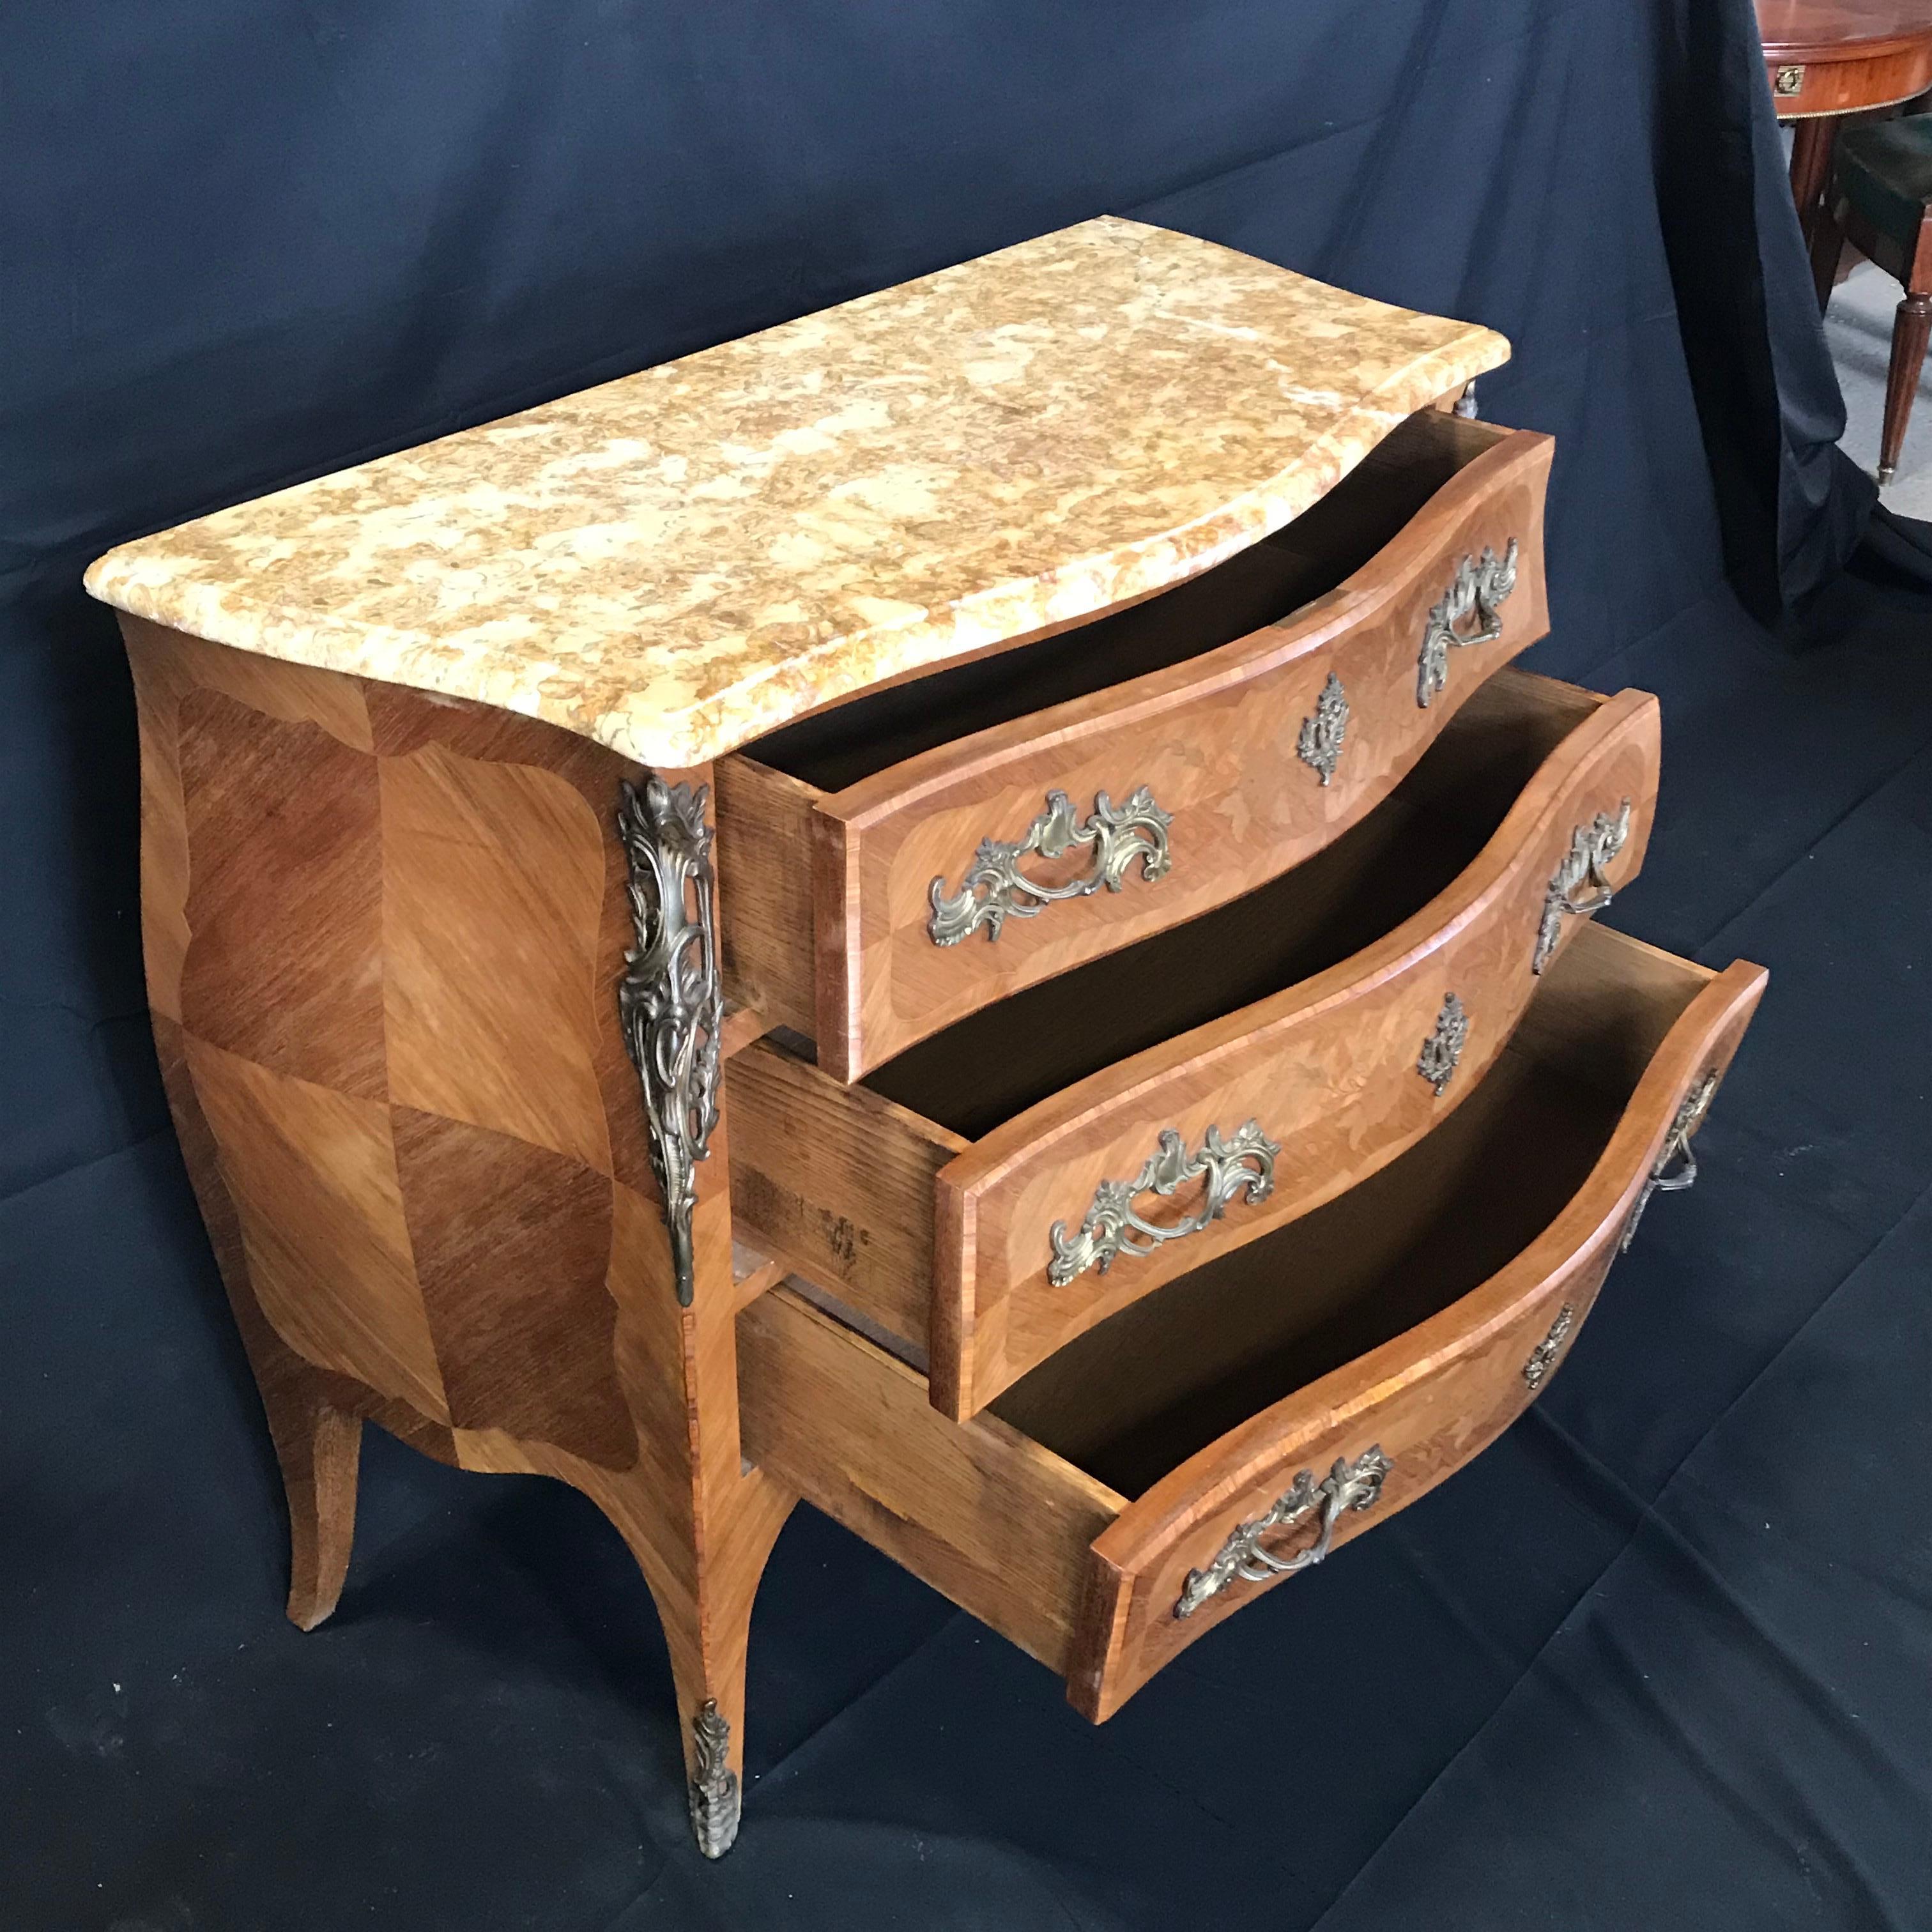 Beautiful French Louis XV marquetry walnut commode having 3 drawers, brass hardware and caramel and cream beveled marble top – all original.
#442.